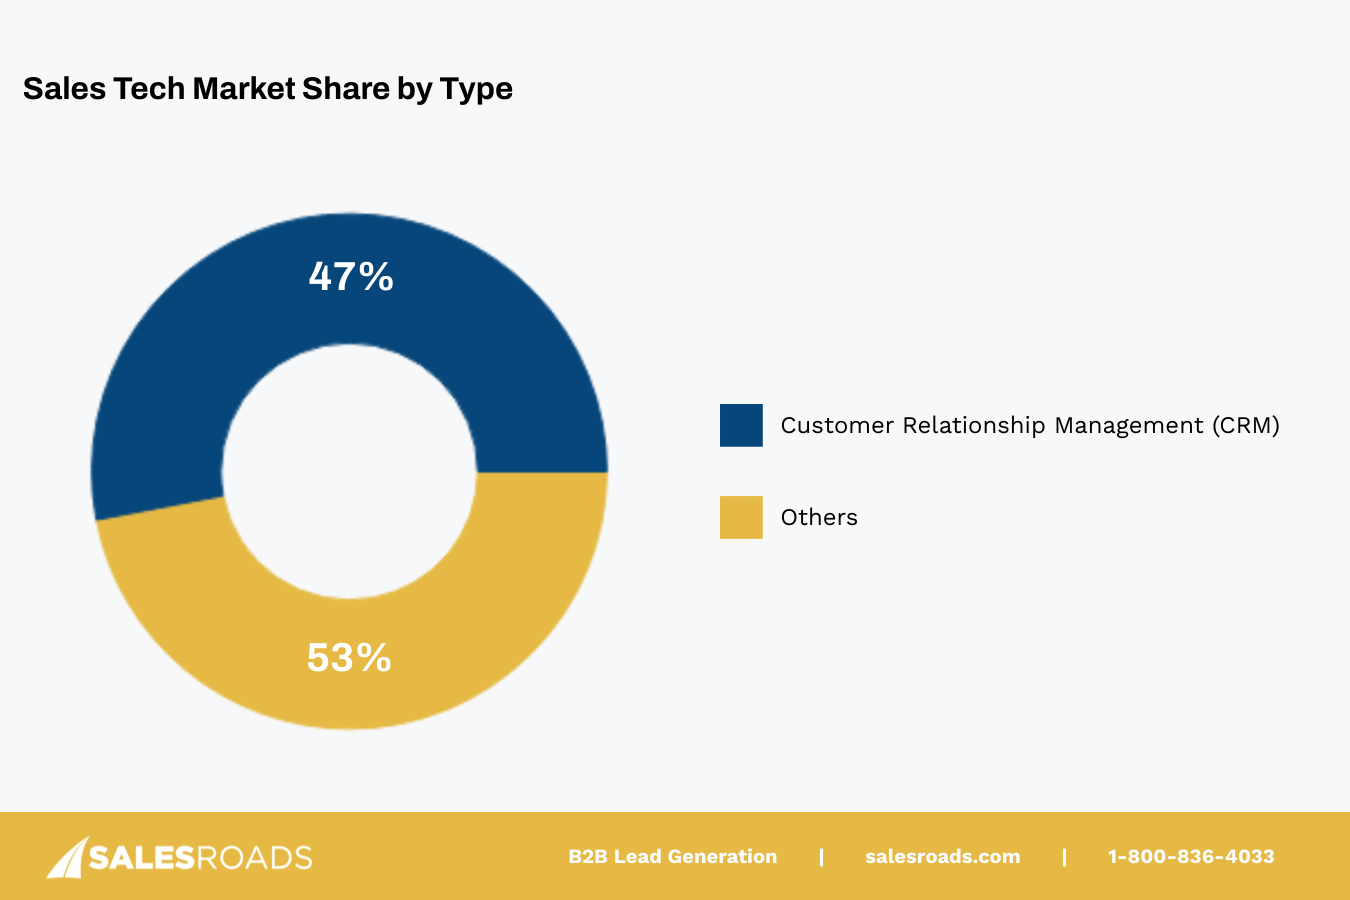 By product type, CRM commands the largest market segment, holding a 47% share.